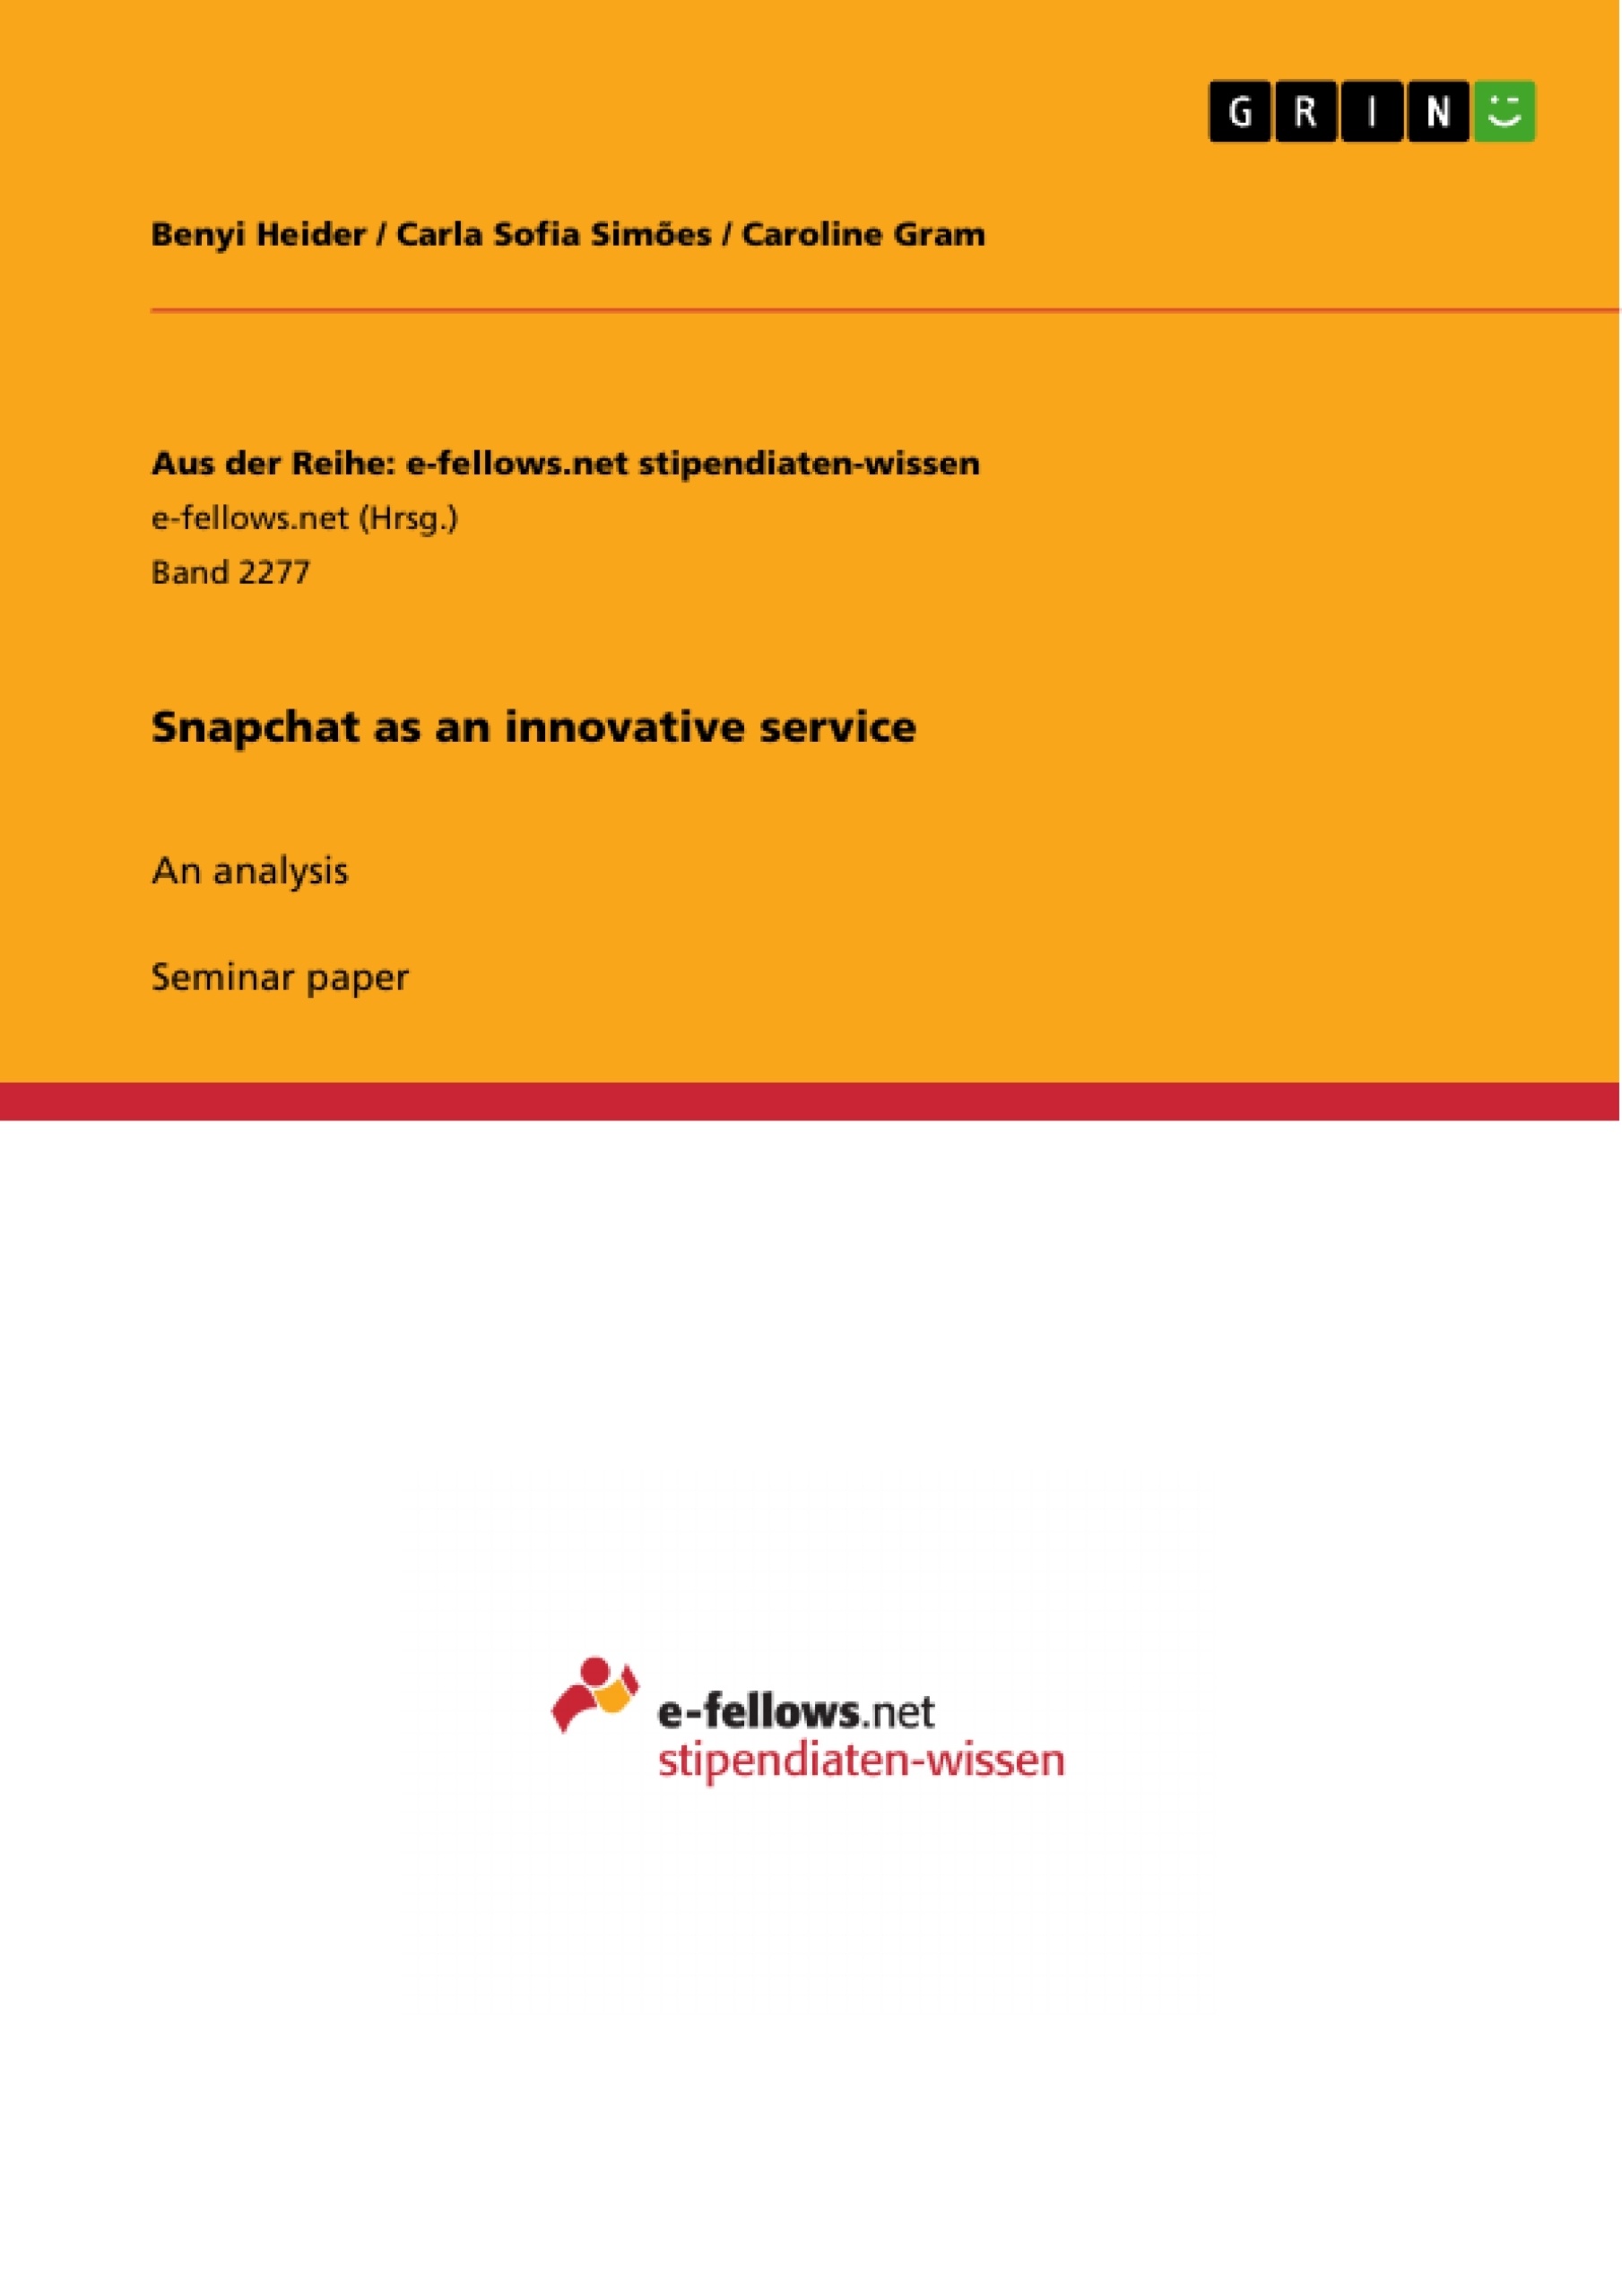 Title: Snapchat as an innovative service